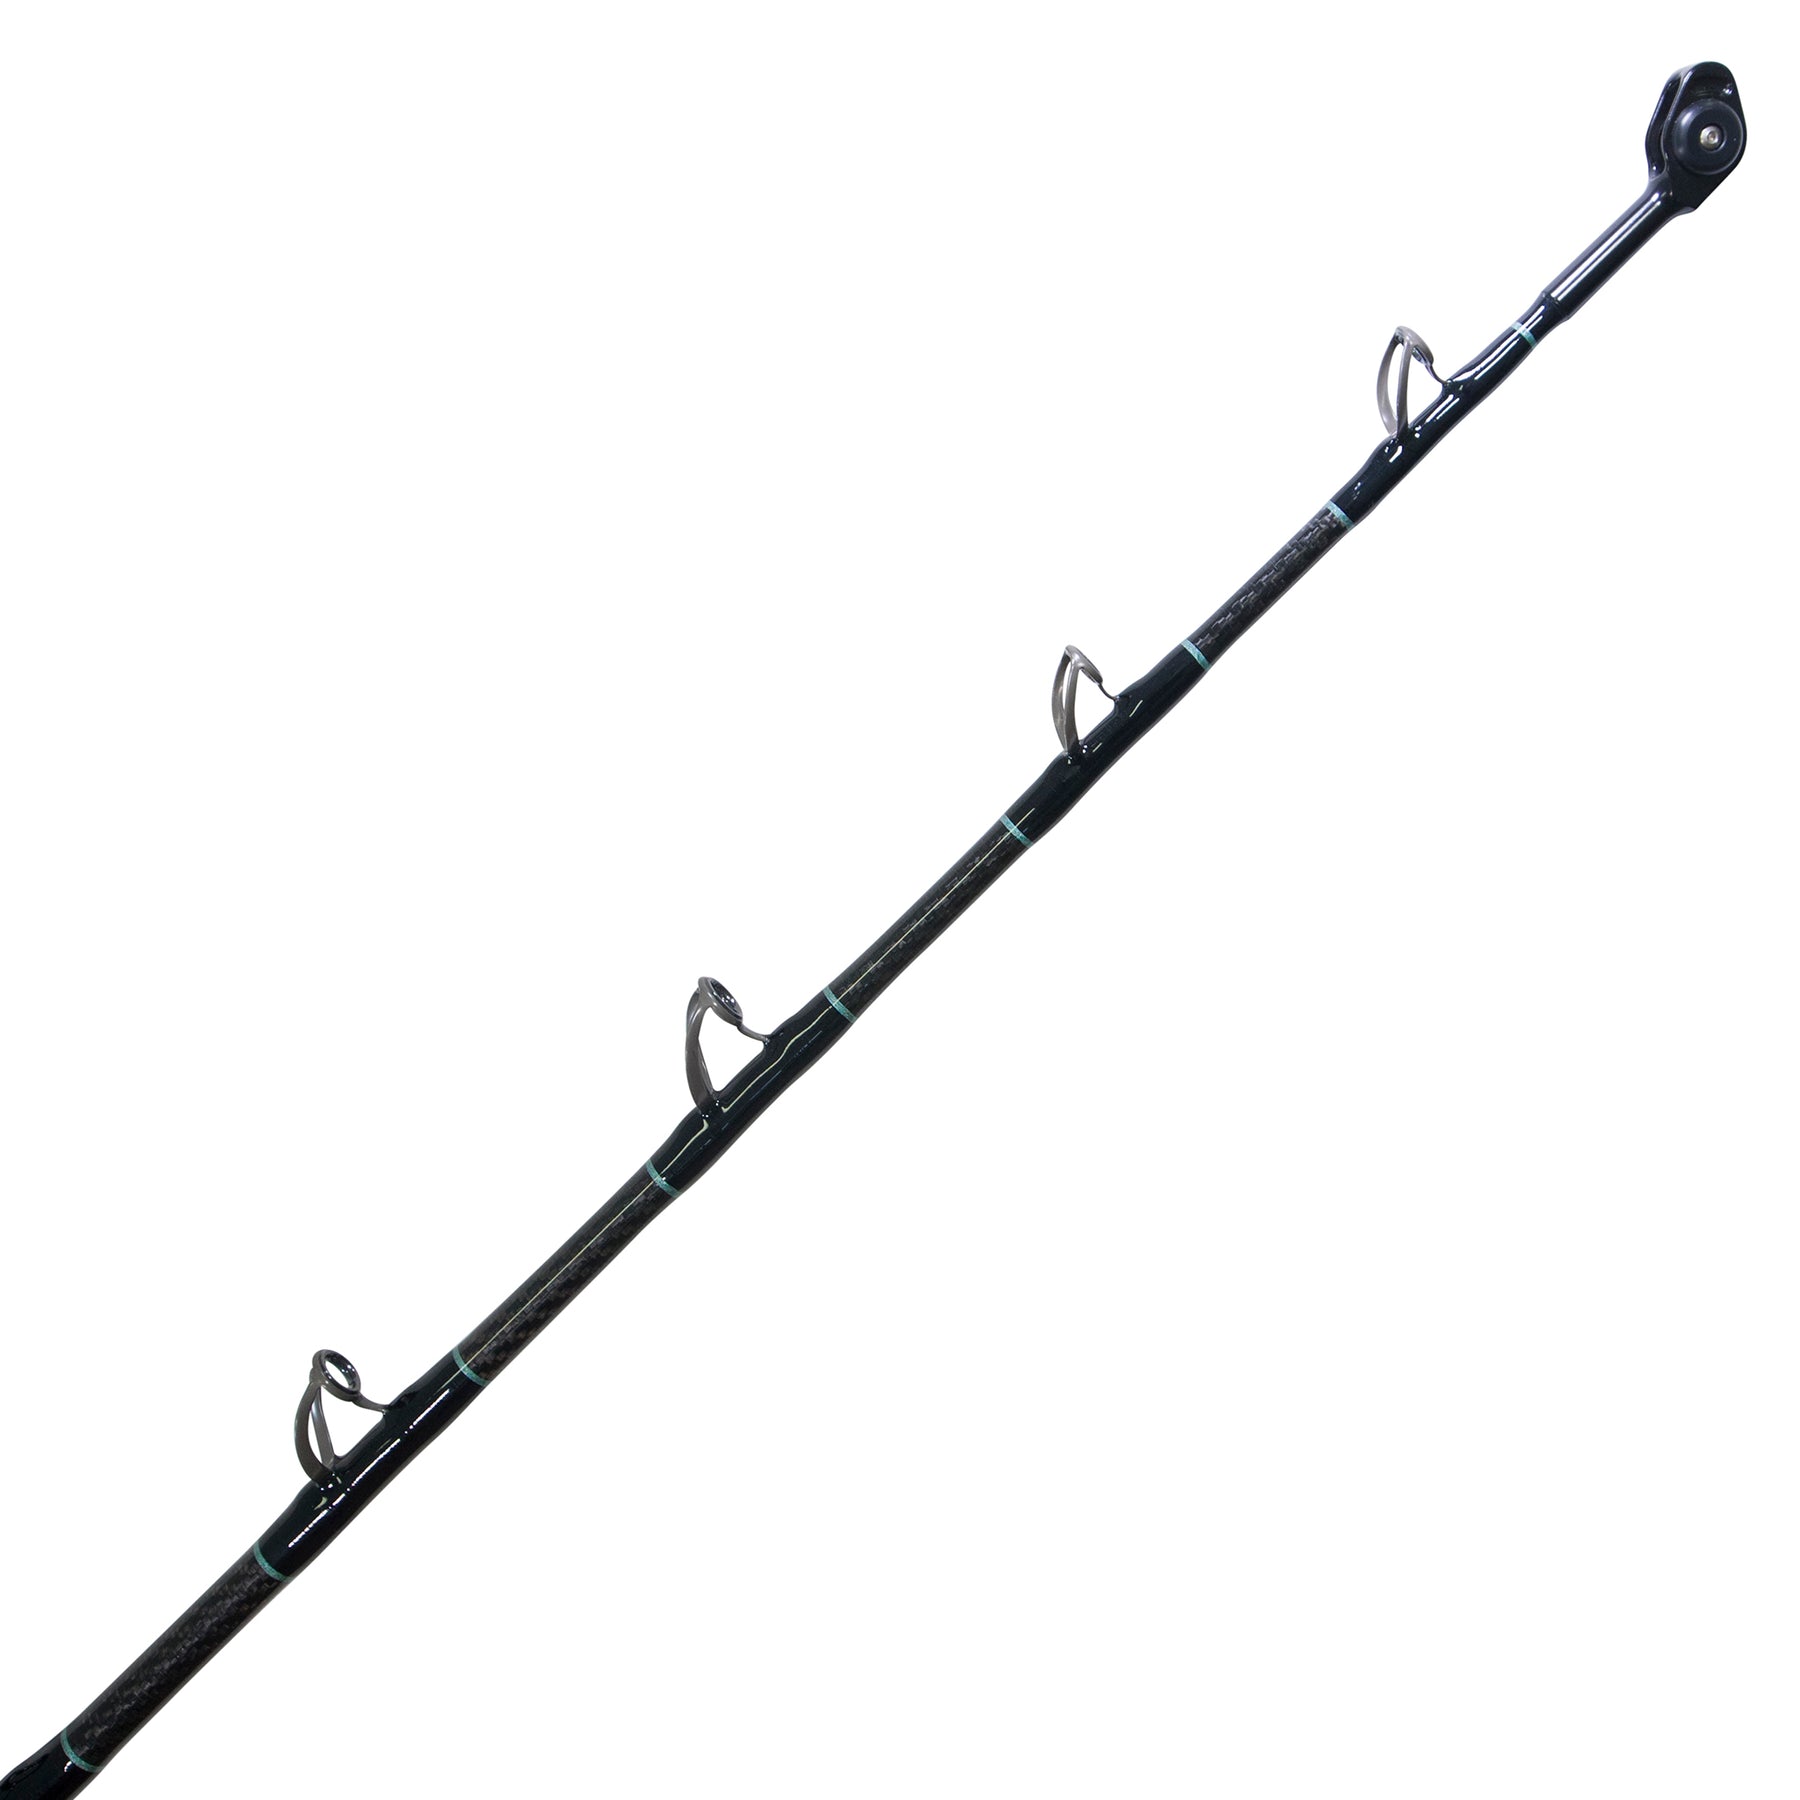 BlacktipH Shark Fishing Rod with Winthrop Terminator Butt and Carbon F